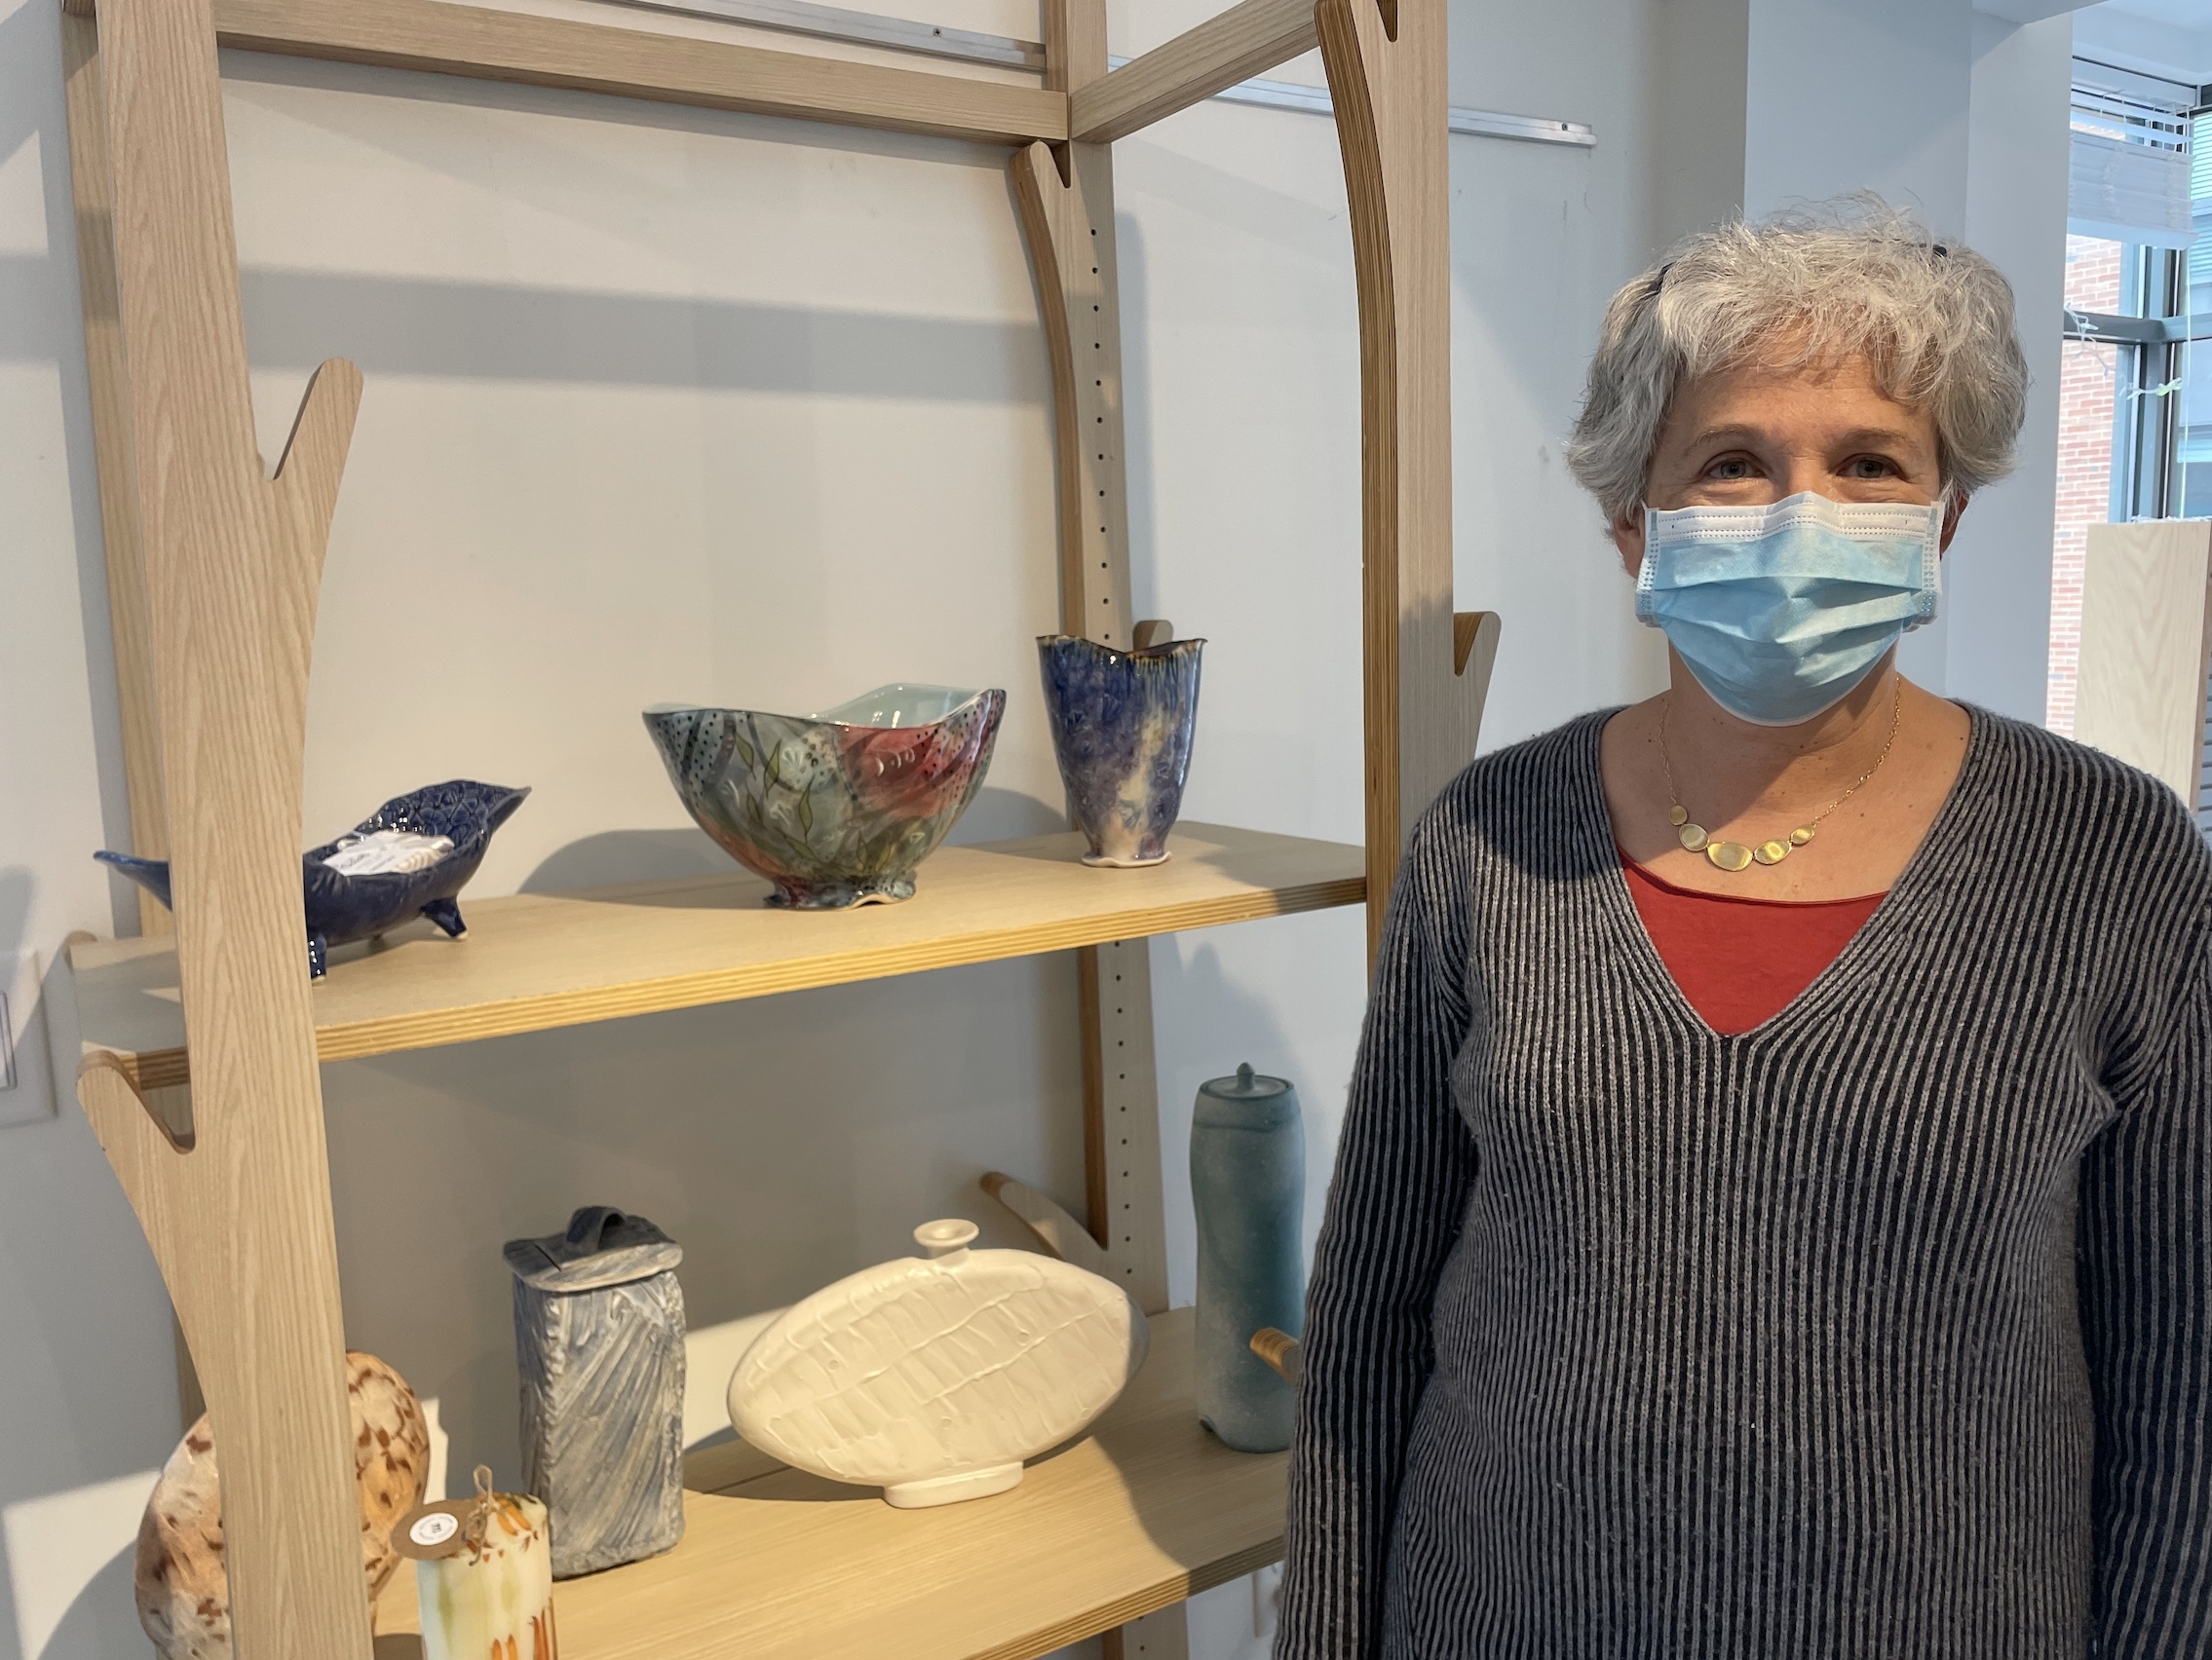 Ellen Weinberg shows her ceramics for sale on the second shelf of a display in the New Art Shop.